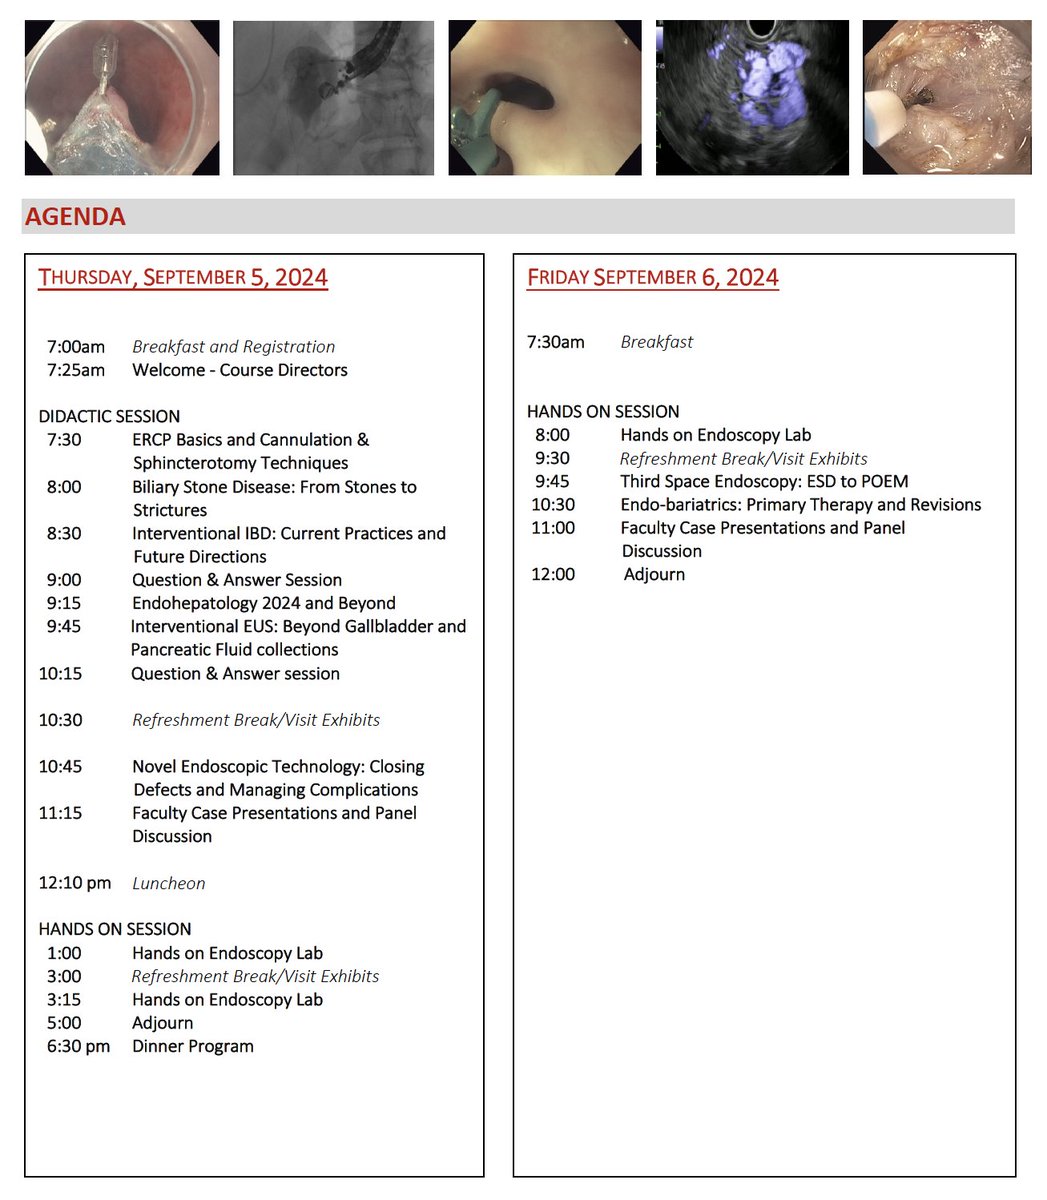 Thank you to all those who registered to our annual therapeutic endoscopy course in September. We are looking forward to meeting you all. Fellow grants available. Check out the agenda, lineup of lectures by invited faculty and hands-on sessions. See below for more information